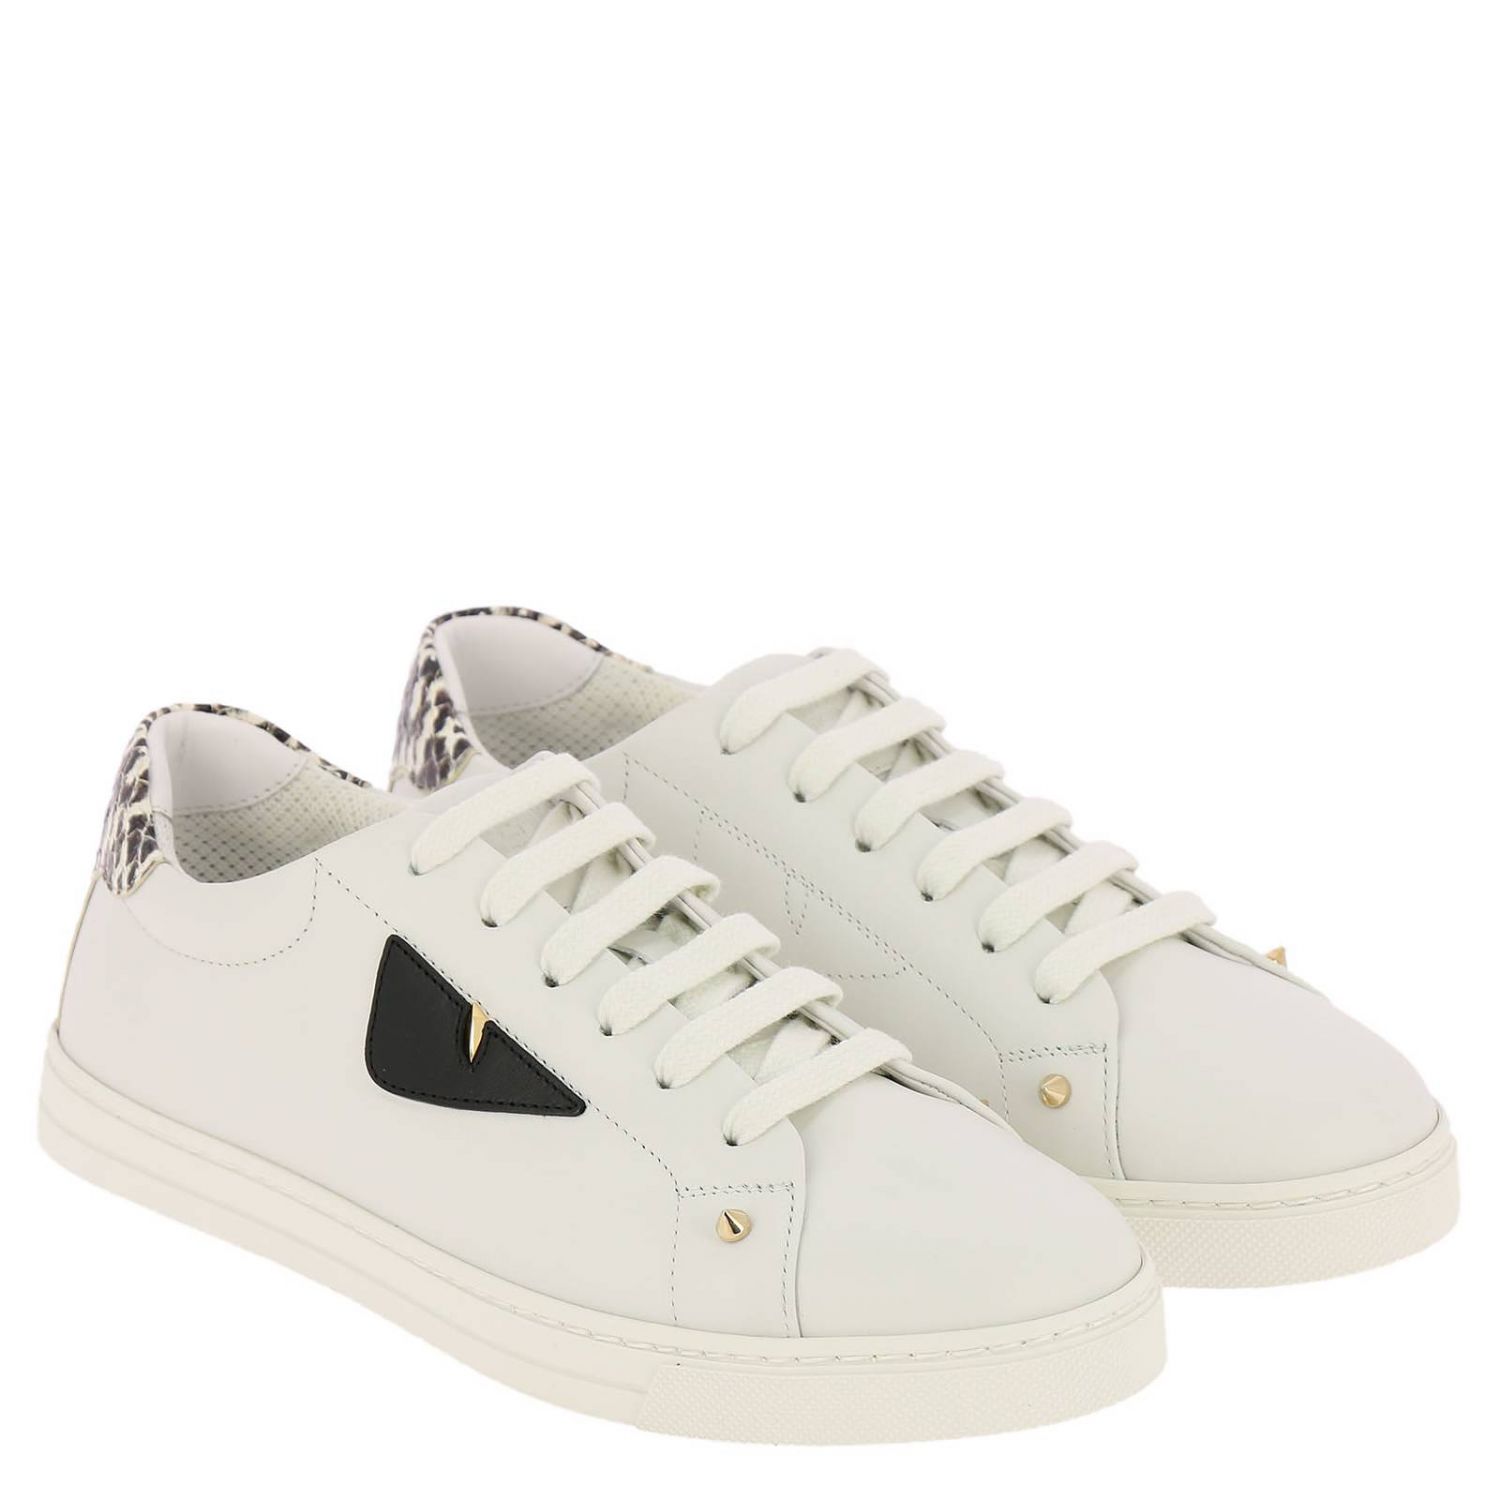 Fendi Outlet: Monster Eyes Laced-up sneakers in genuine smooth leather ...